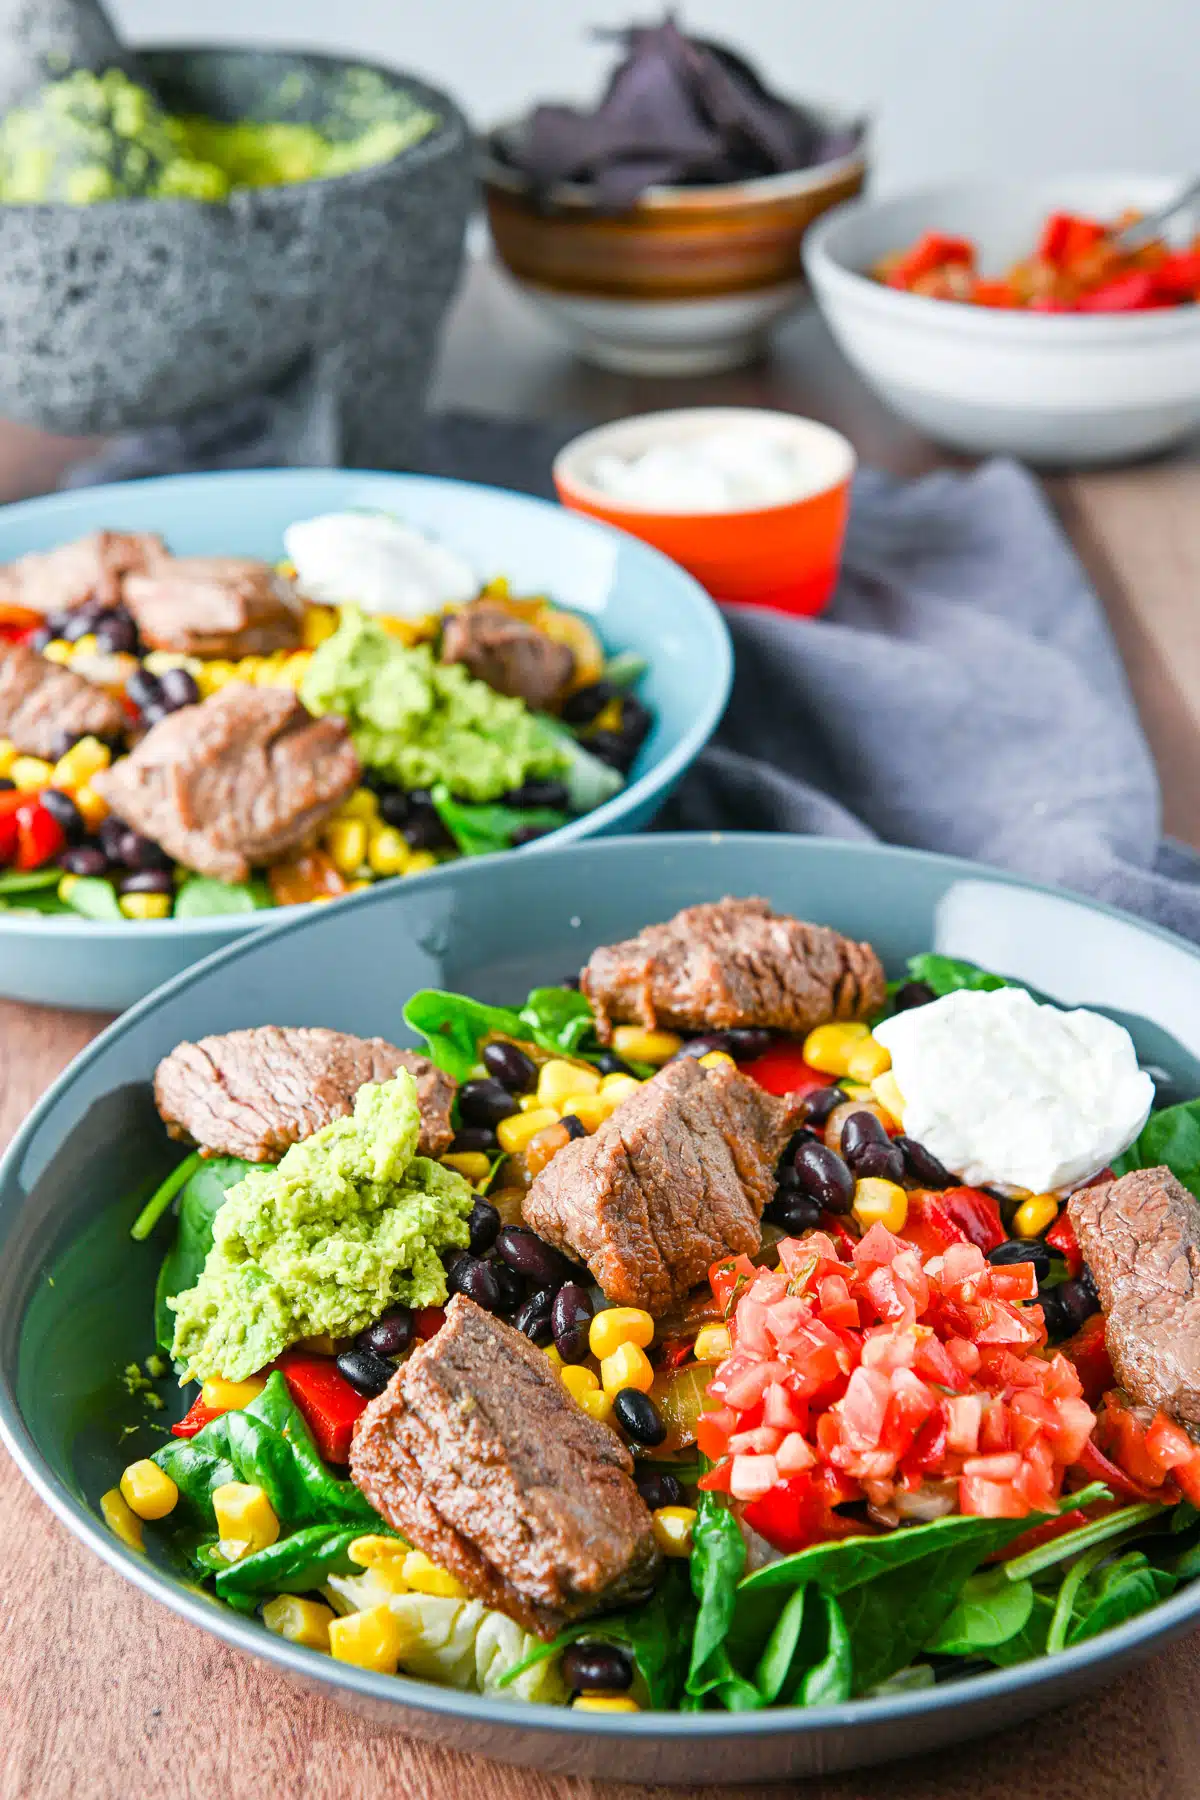 Steak on the vegetables, along with condiments in bowls with chips, sour cream, and guacamole behind them